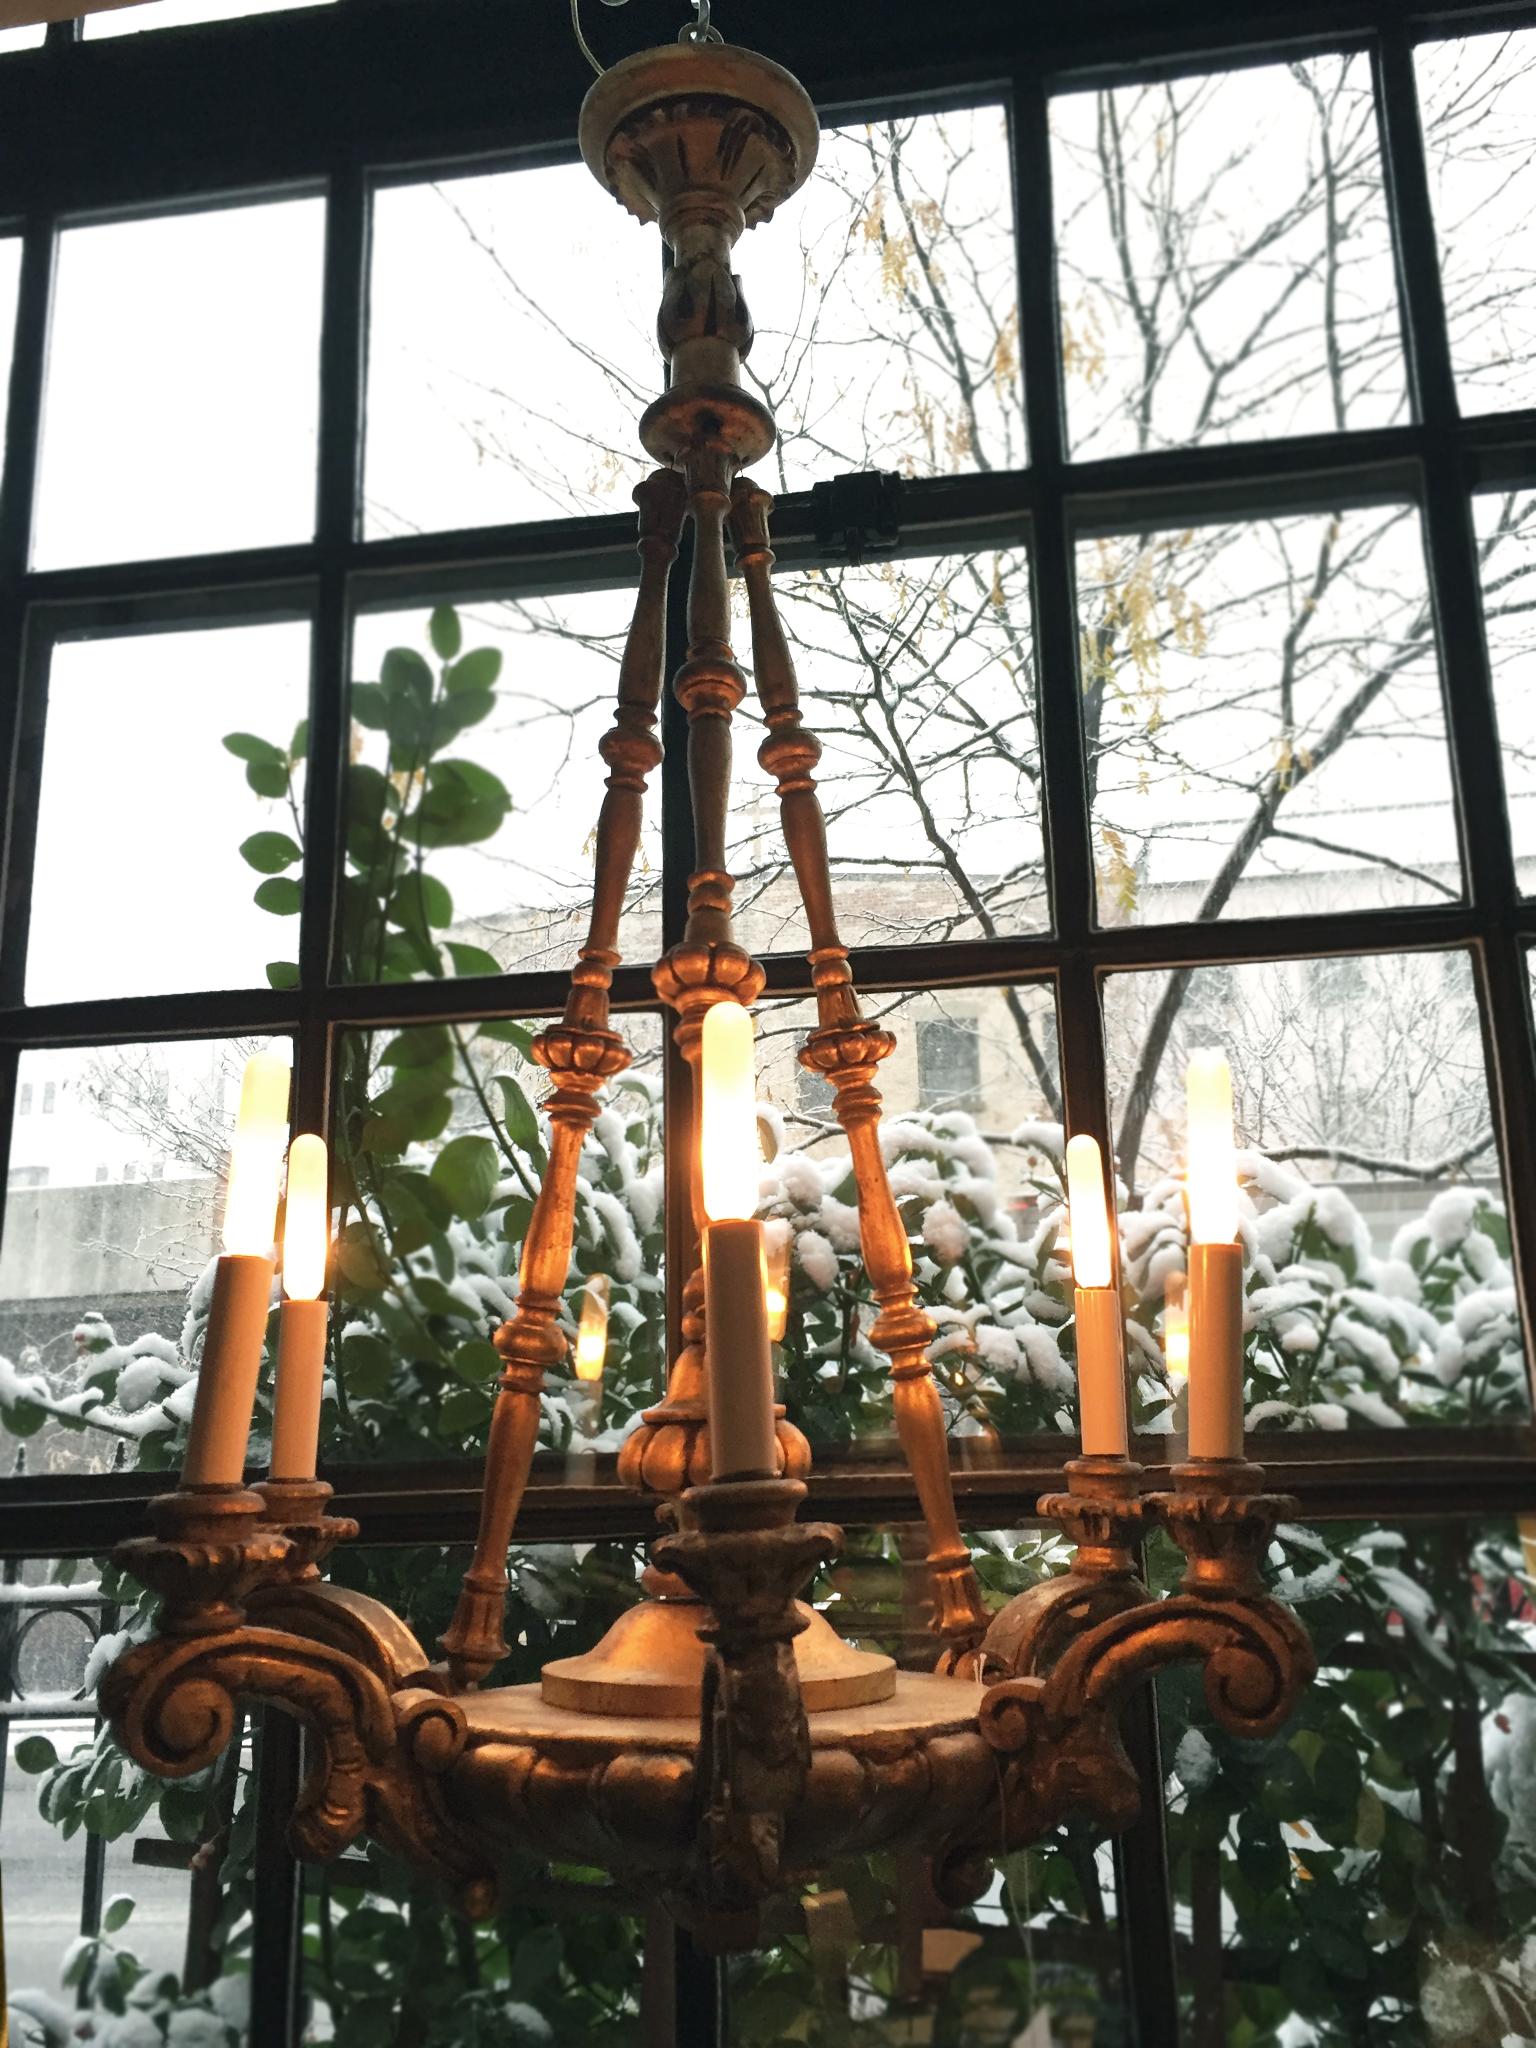 This 1920s Italian chandelier is comprised of wood with a gilt finish. The piece has a Baroque sensibility with its dramatic scrolled arms, bobeches, spindle frame, and canopy. The spindle frame leading up to the canopy is collapsible and hangs